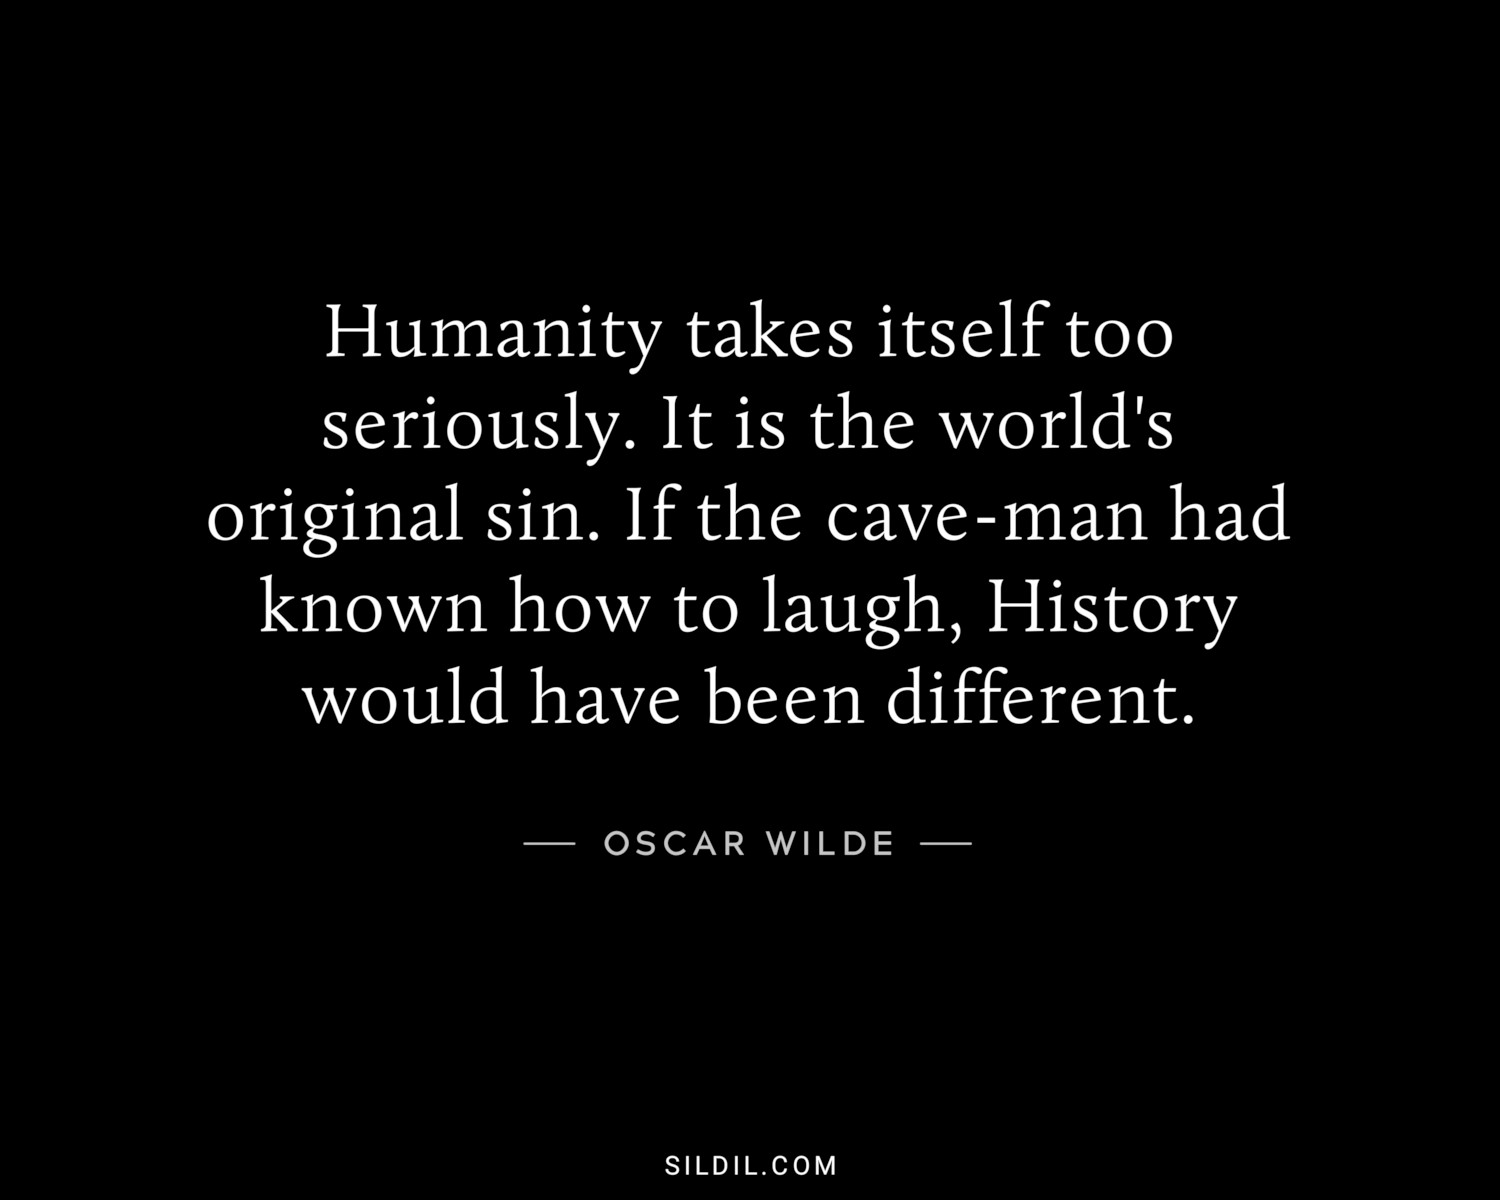 Humanity takes itself too seriously. It is the world's original sin. If the cave-man had known how to laugh, History would have been different.